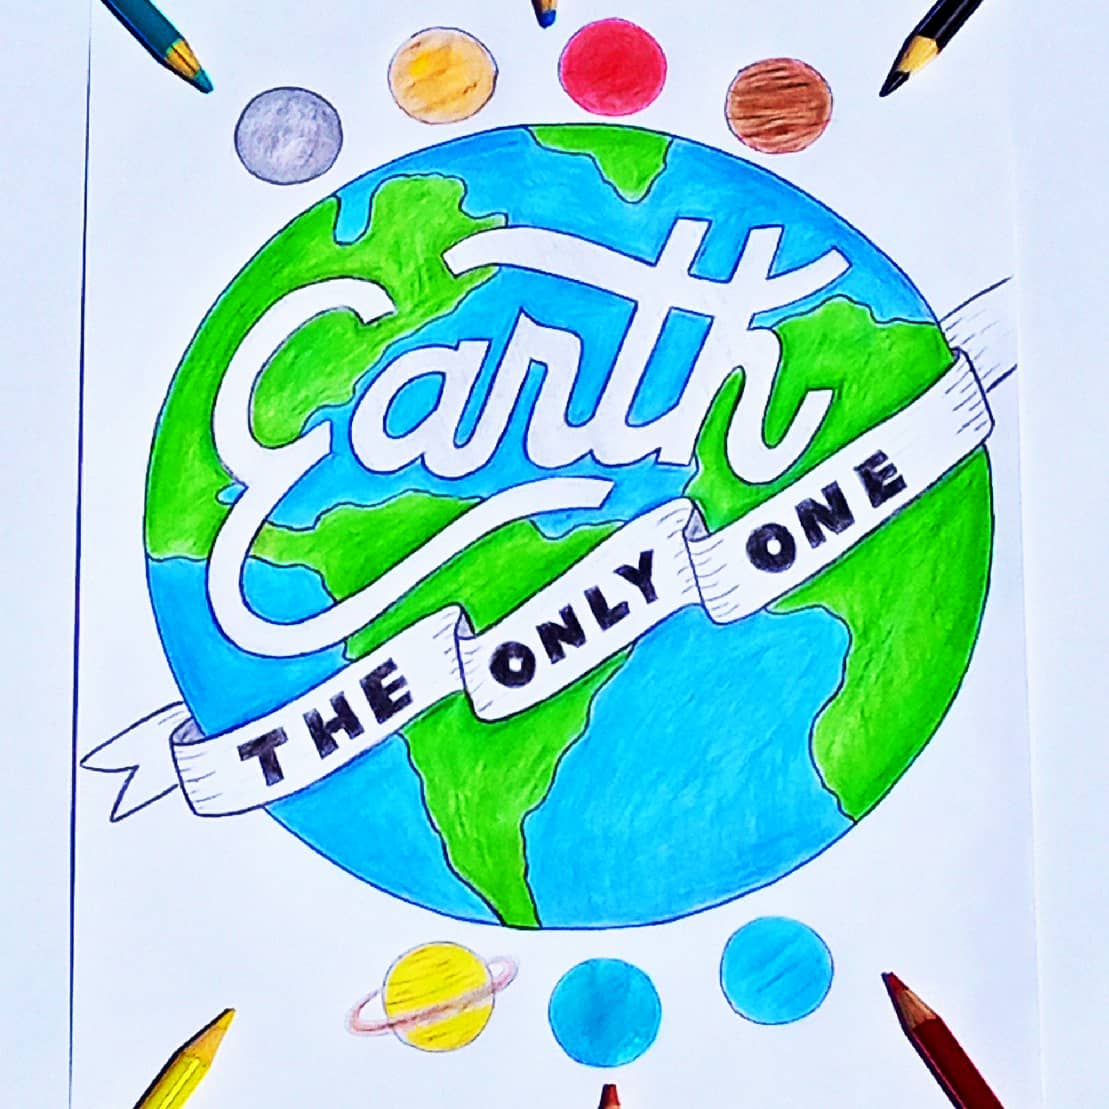 My entry for an art competition by Toward2030 on IG

Earth, The Only One
instagram.com/p/CBEfwskpxAz/…
#nature #Earth #WorldEnvironmentDay2020 #ClimateChange #ClimateAction #SDG13  #art #lettering #YouthForEnvironment #YouthForEarth